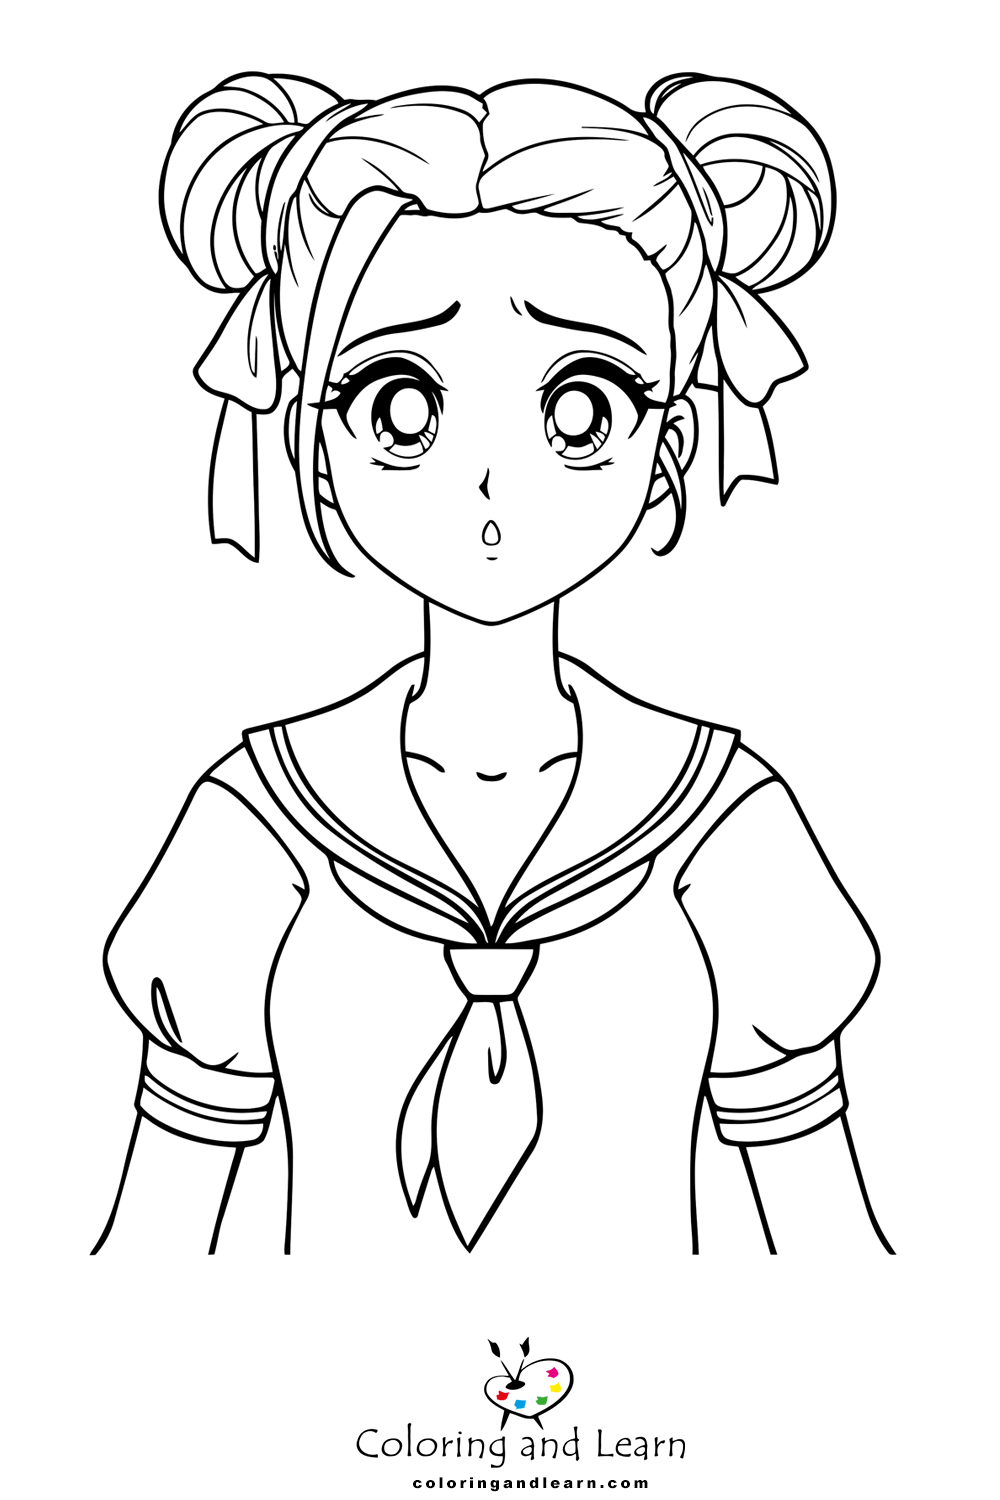 Anime Coloring Pages Free [2023] - The Daily Coloring